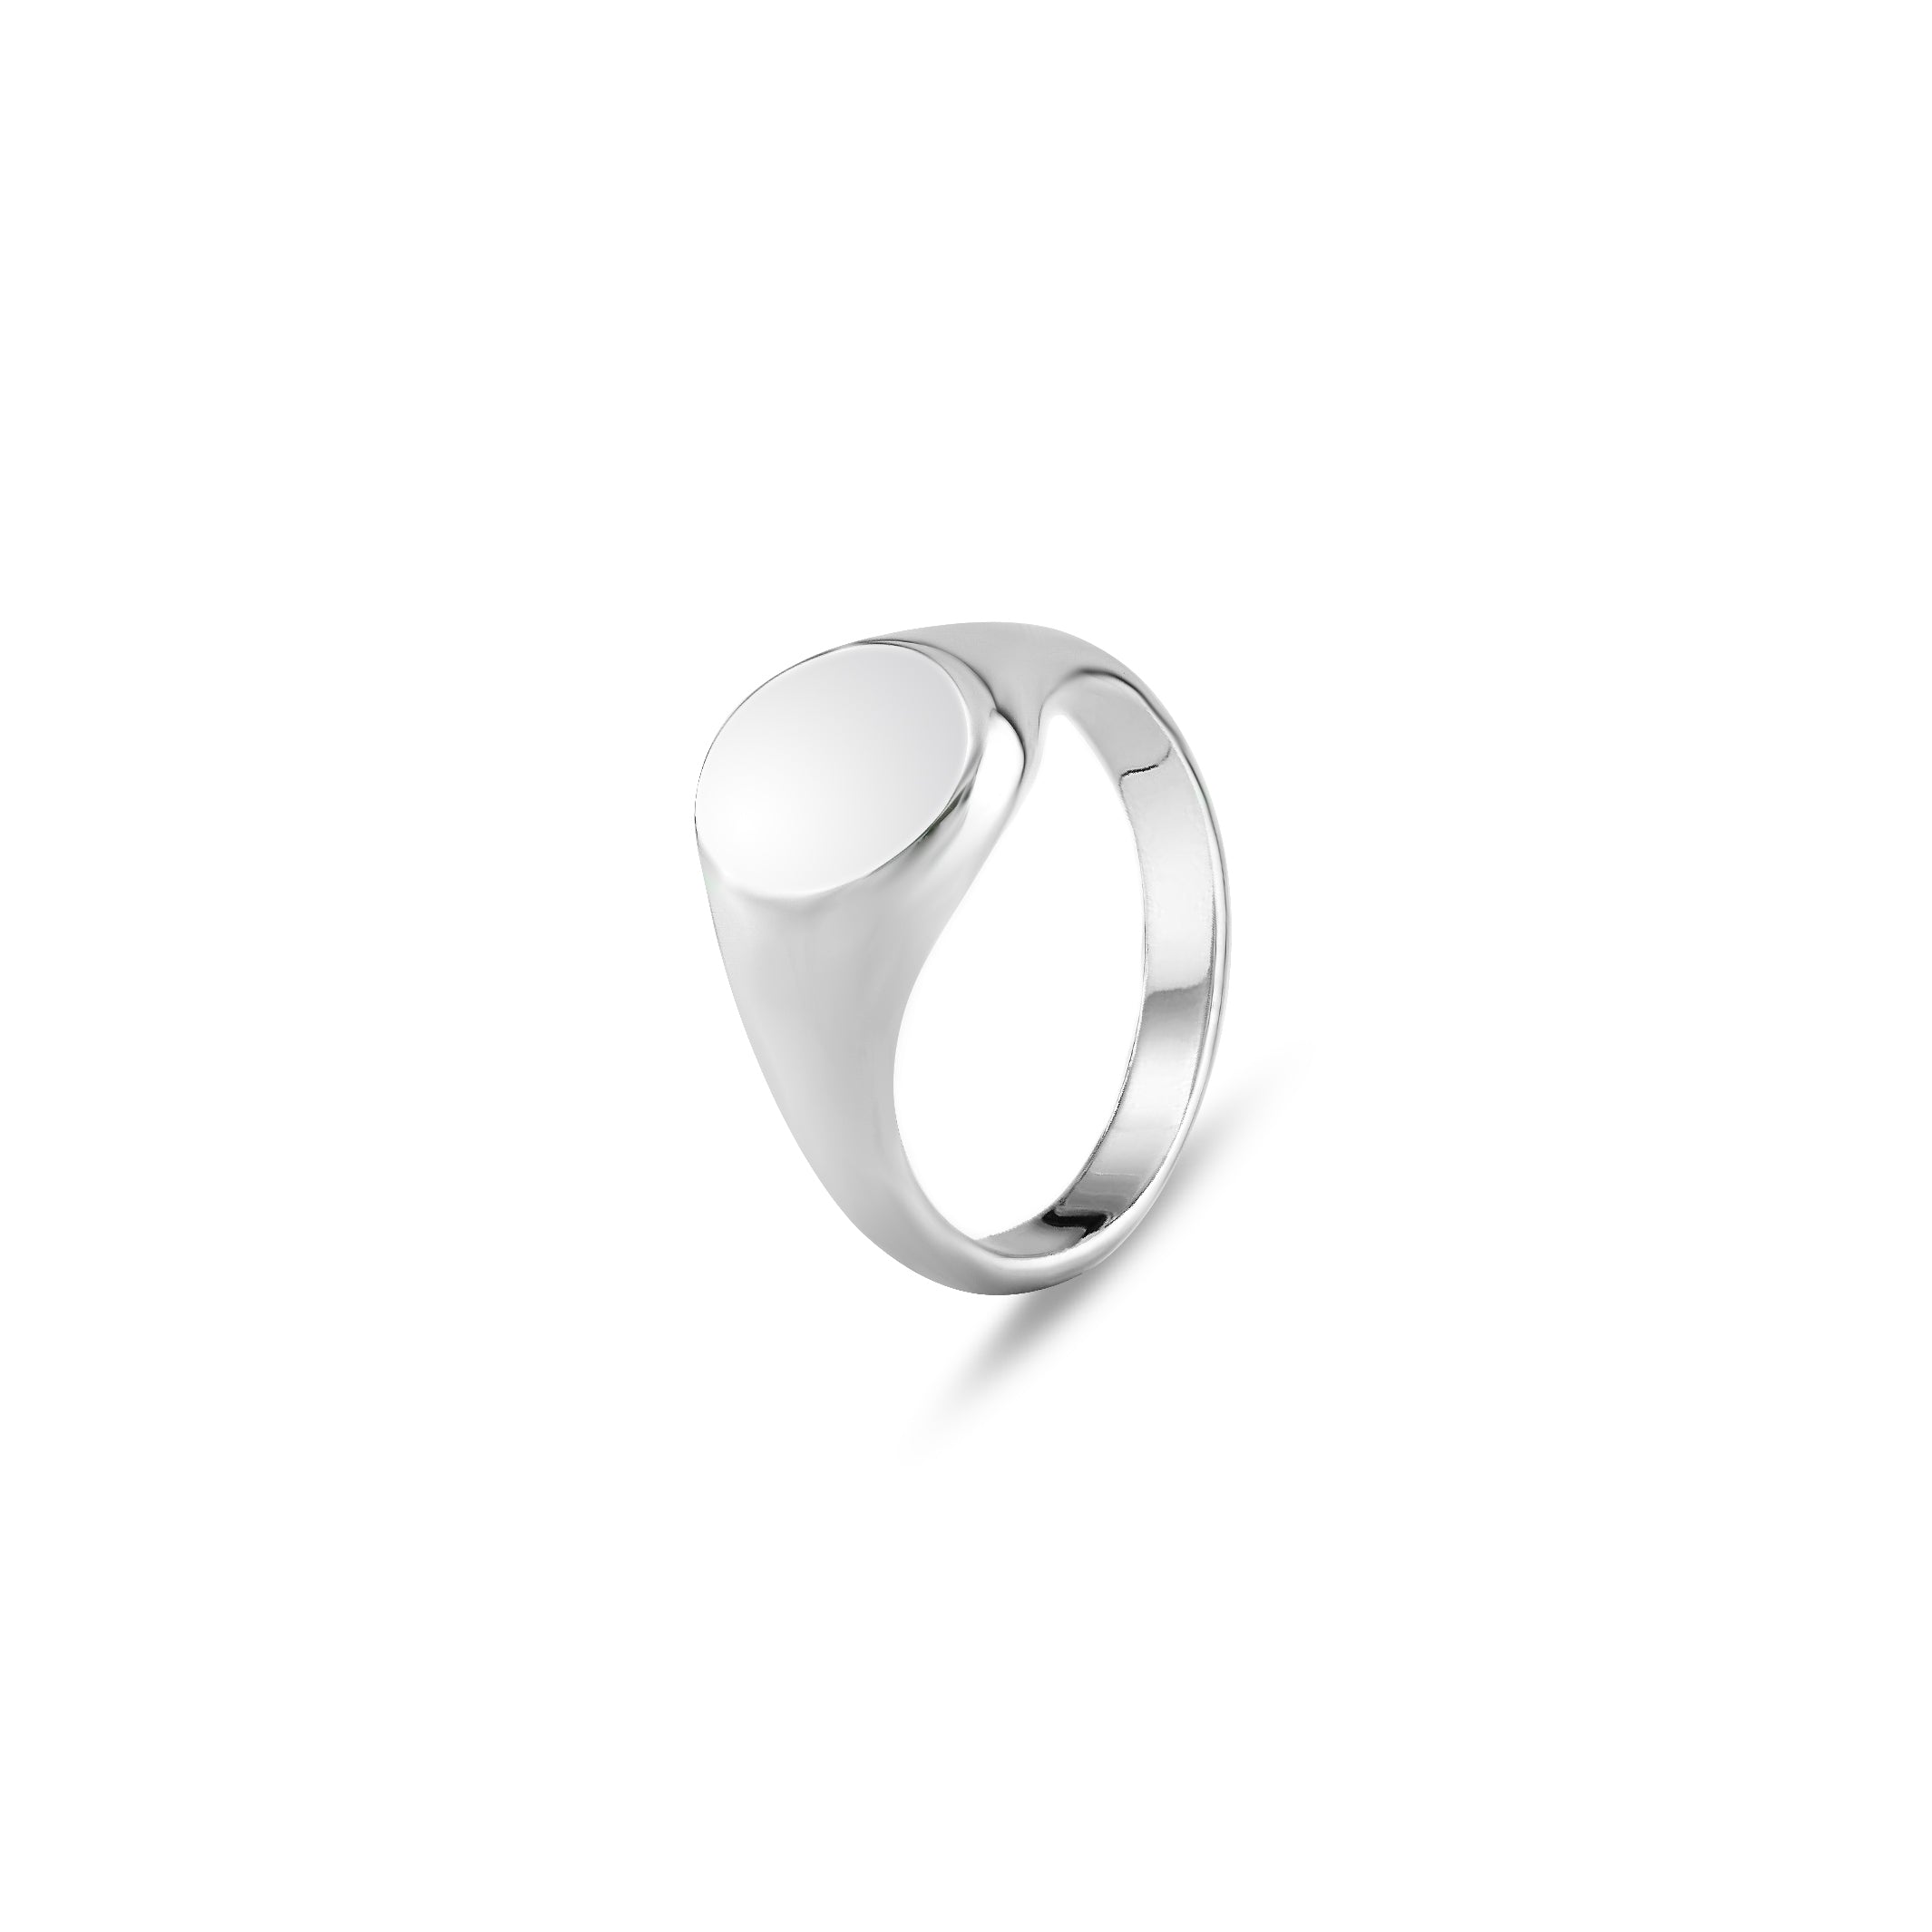 Silver 11 x 9mm Oval Signet Ring